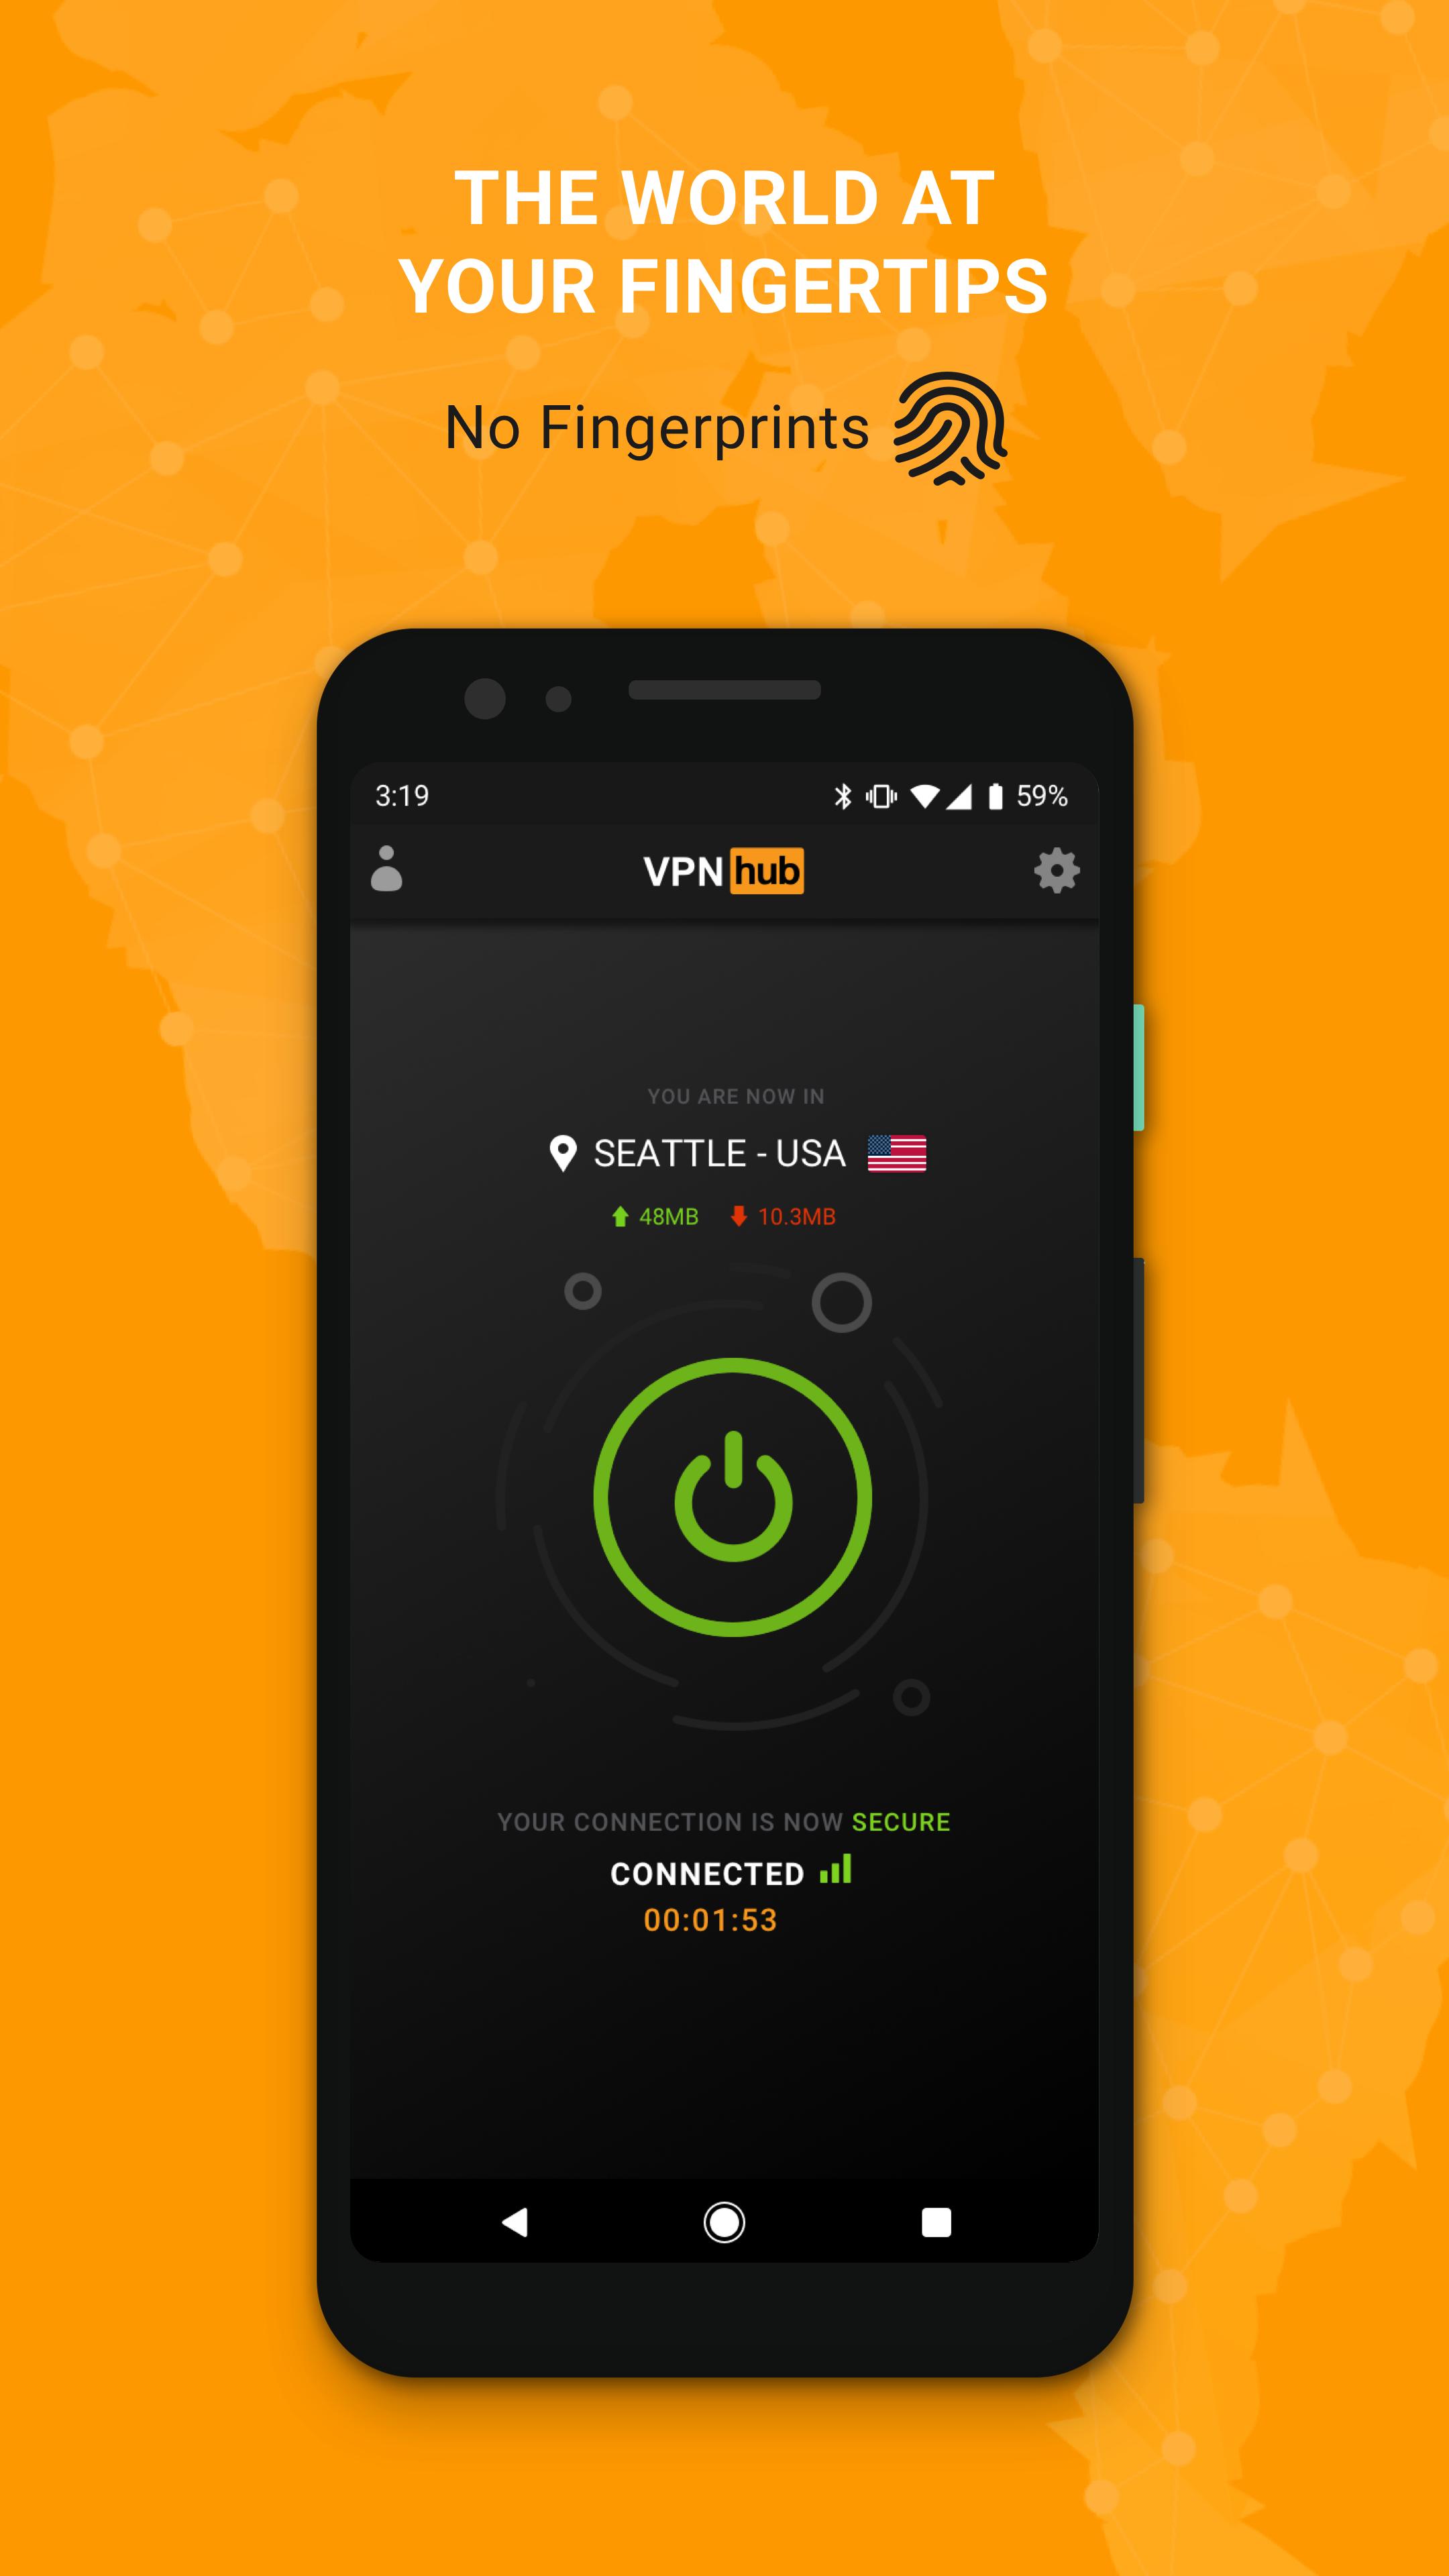 Free VPN - VPNhub for Android: No Logs, No Worries for Android - APK